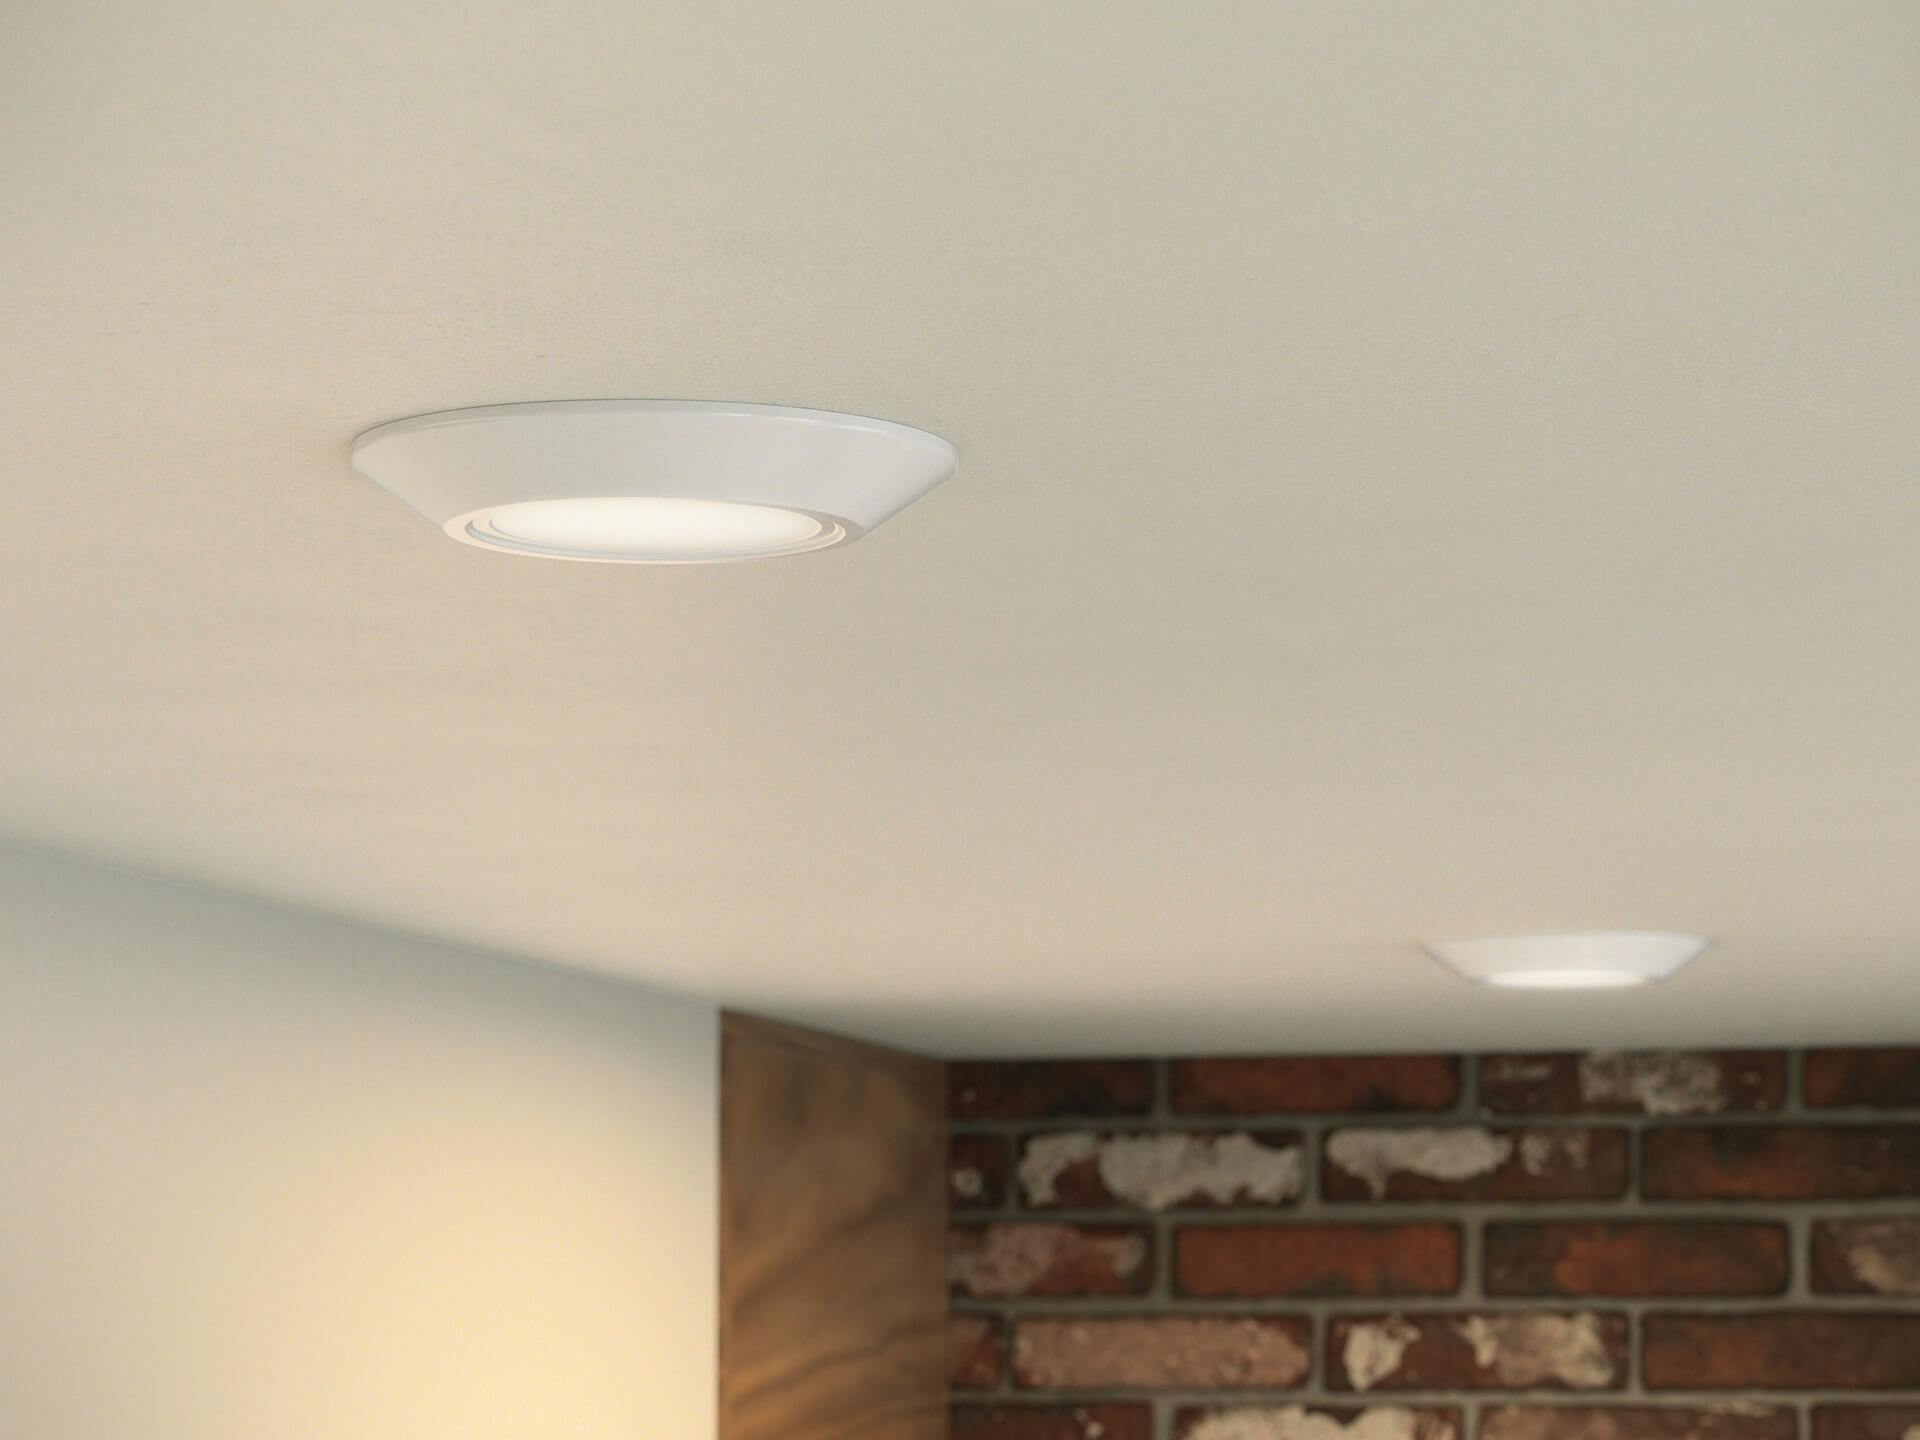 Closeup detail image of the Horizon III recessed light on a white ceiling